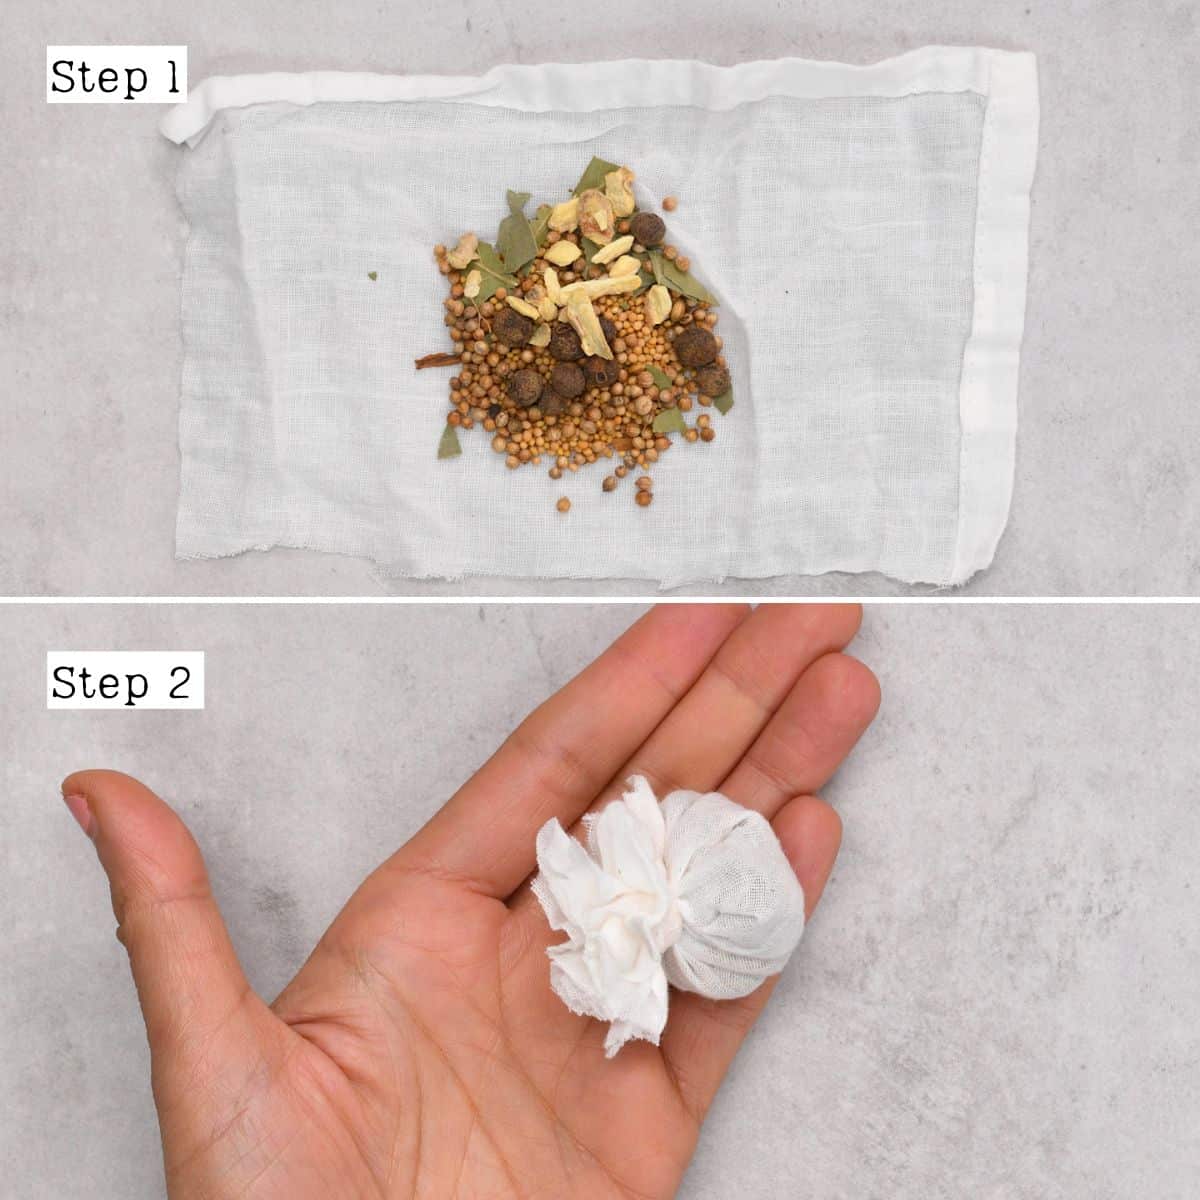 Steps for placing spices in a parcel